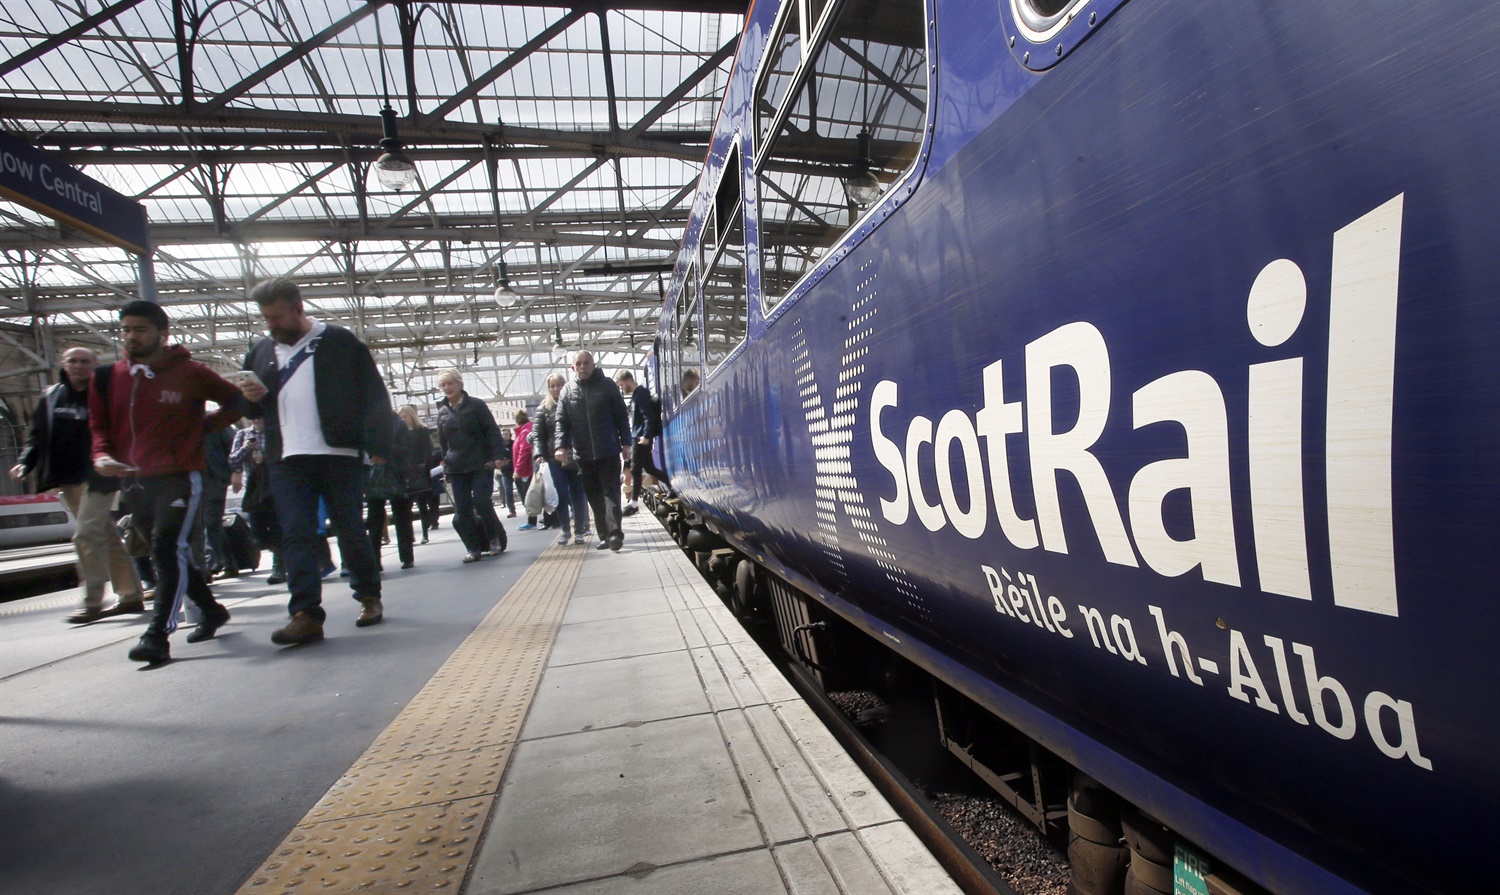 ScotRail cancels services because of Storm Barbara